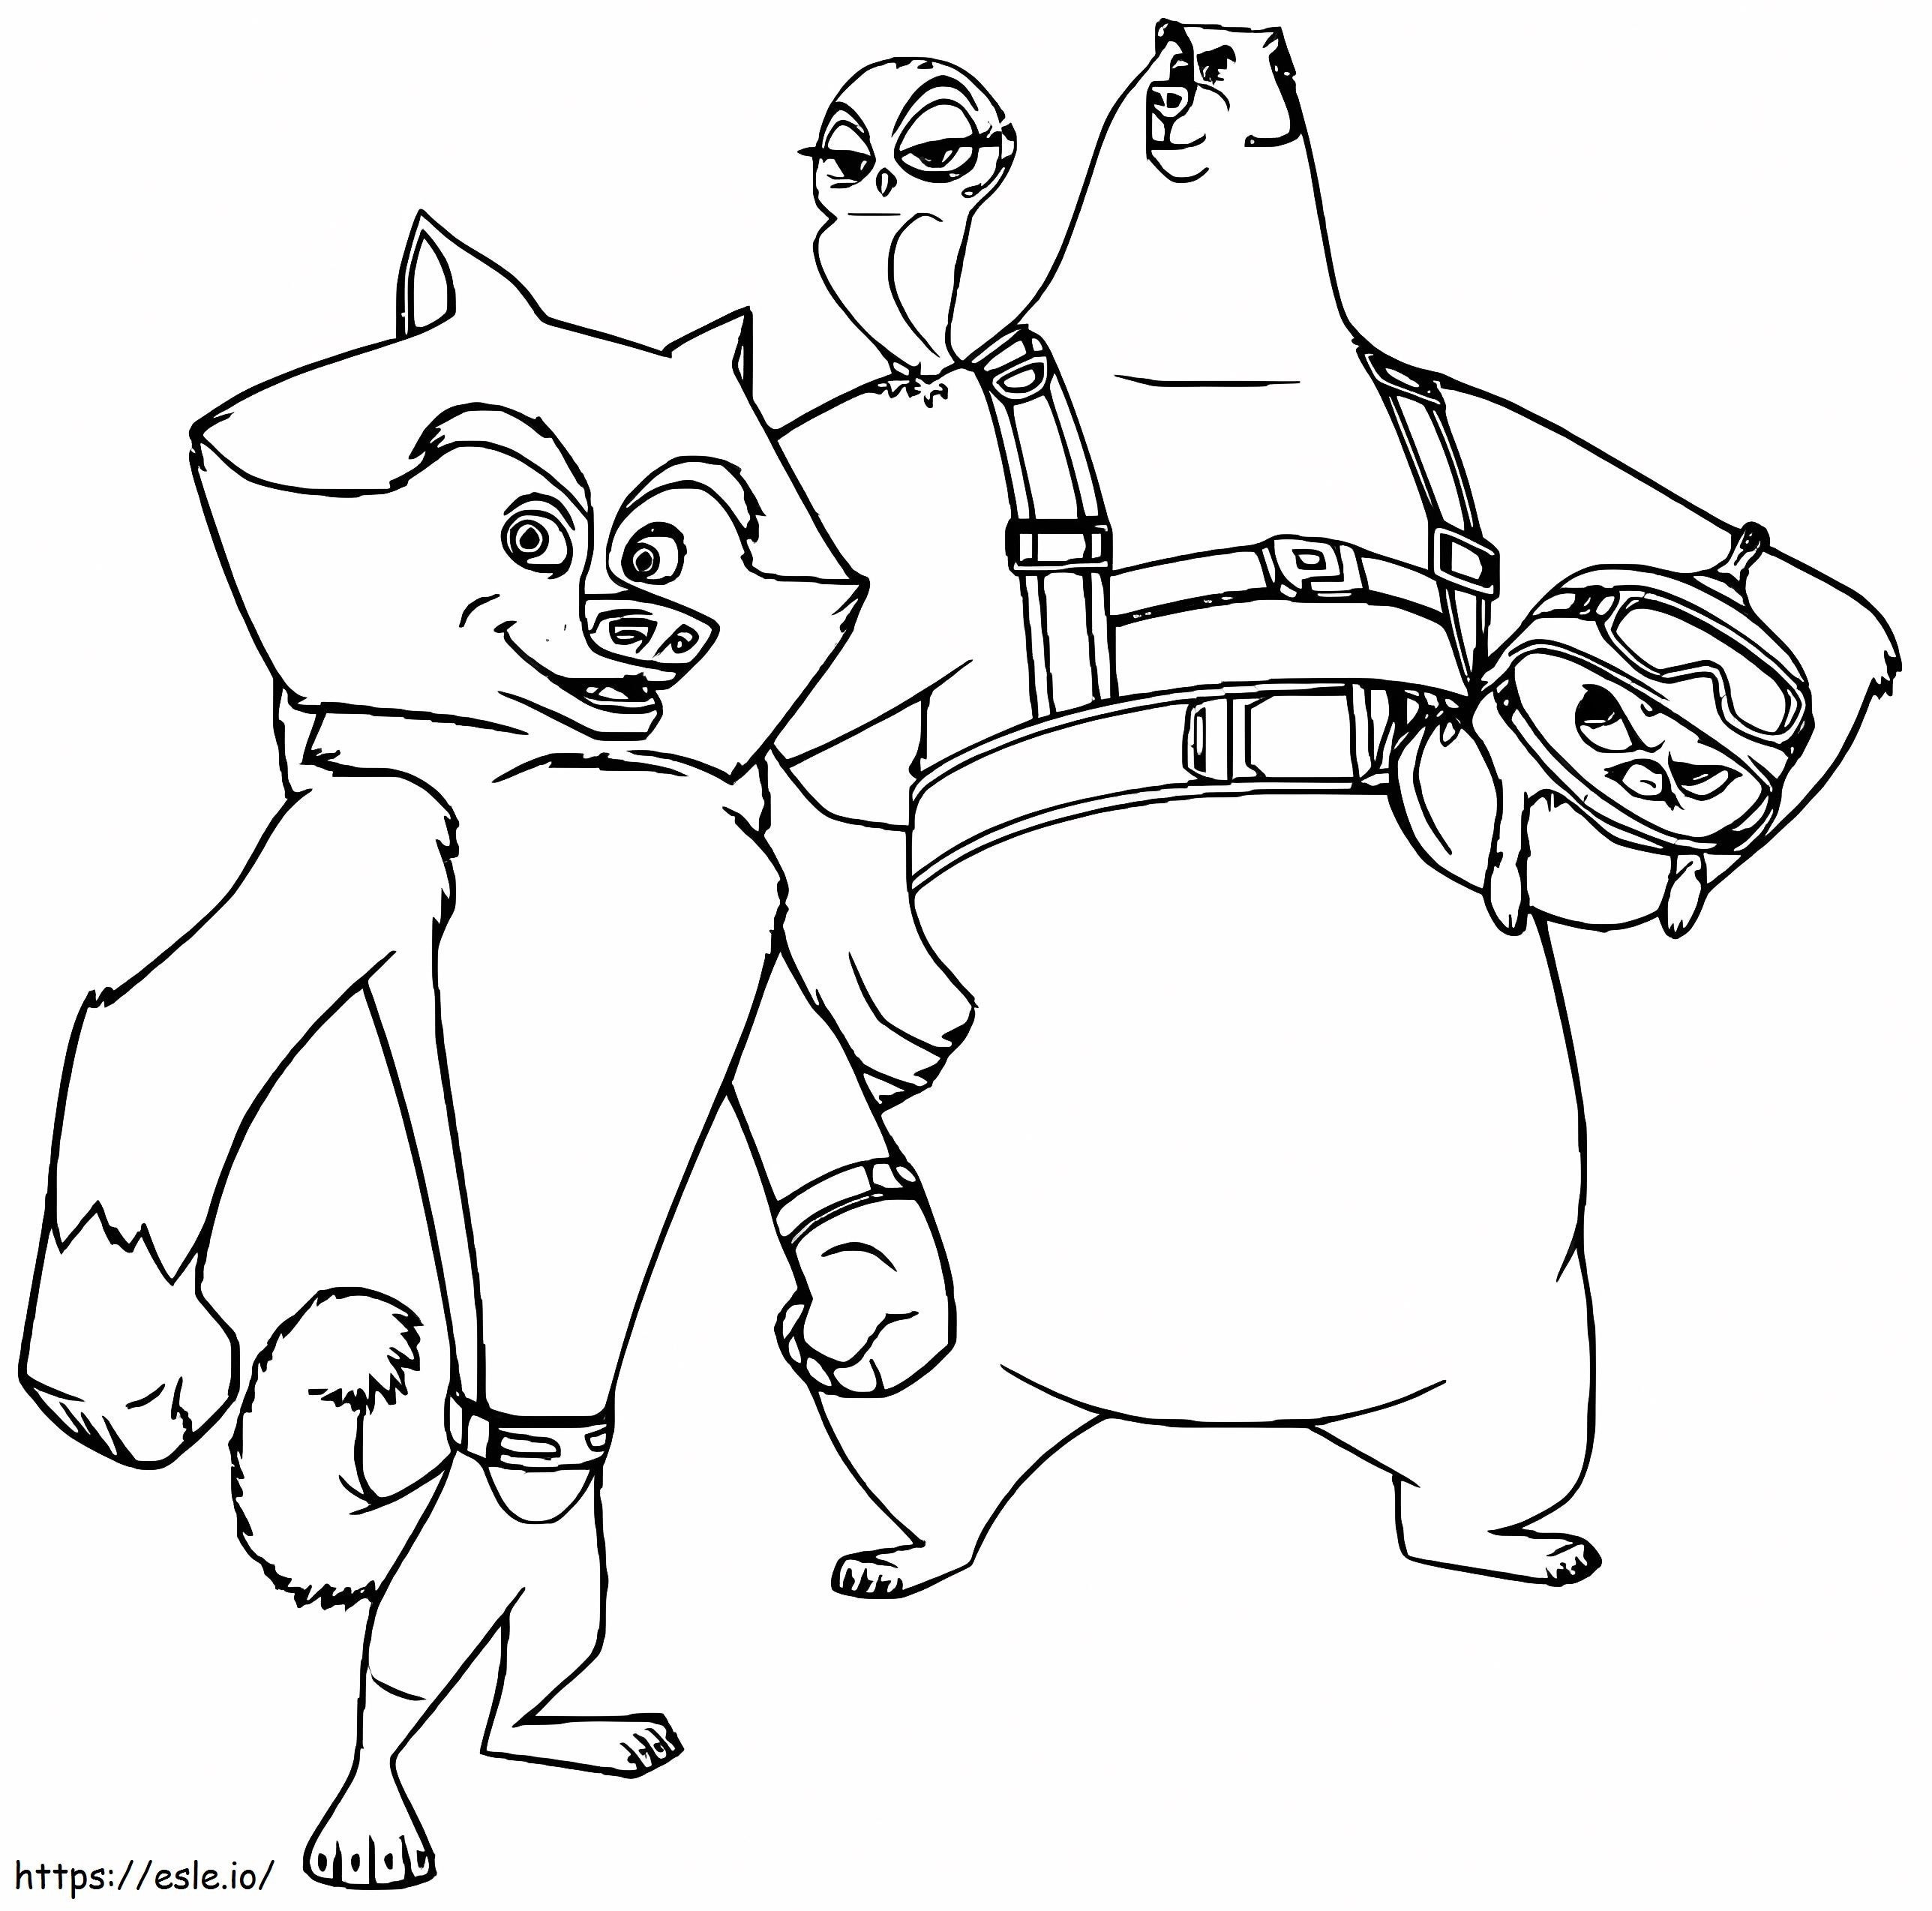 Penguins Of Madagascar Characters coloring page